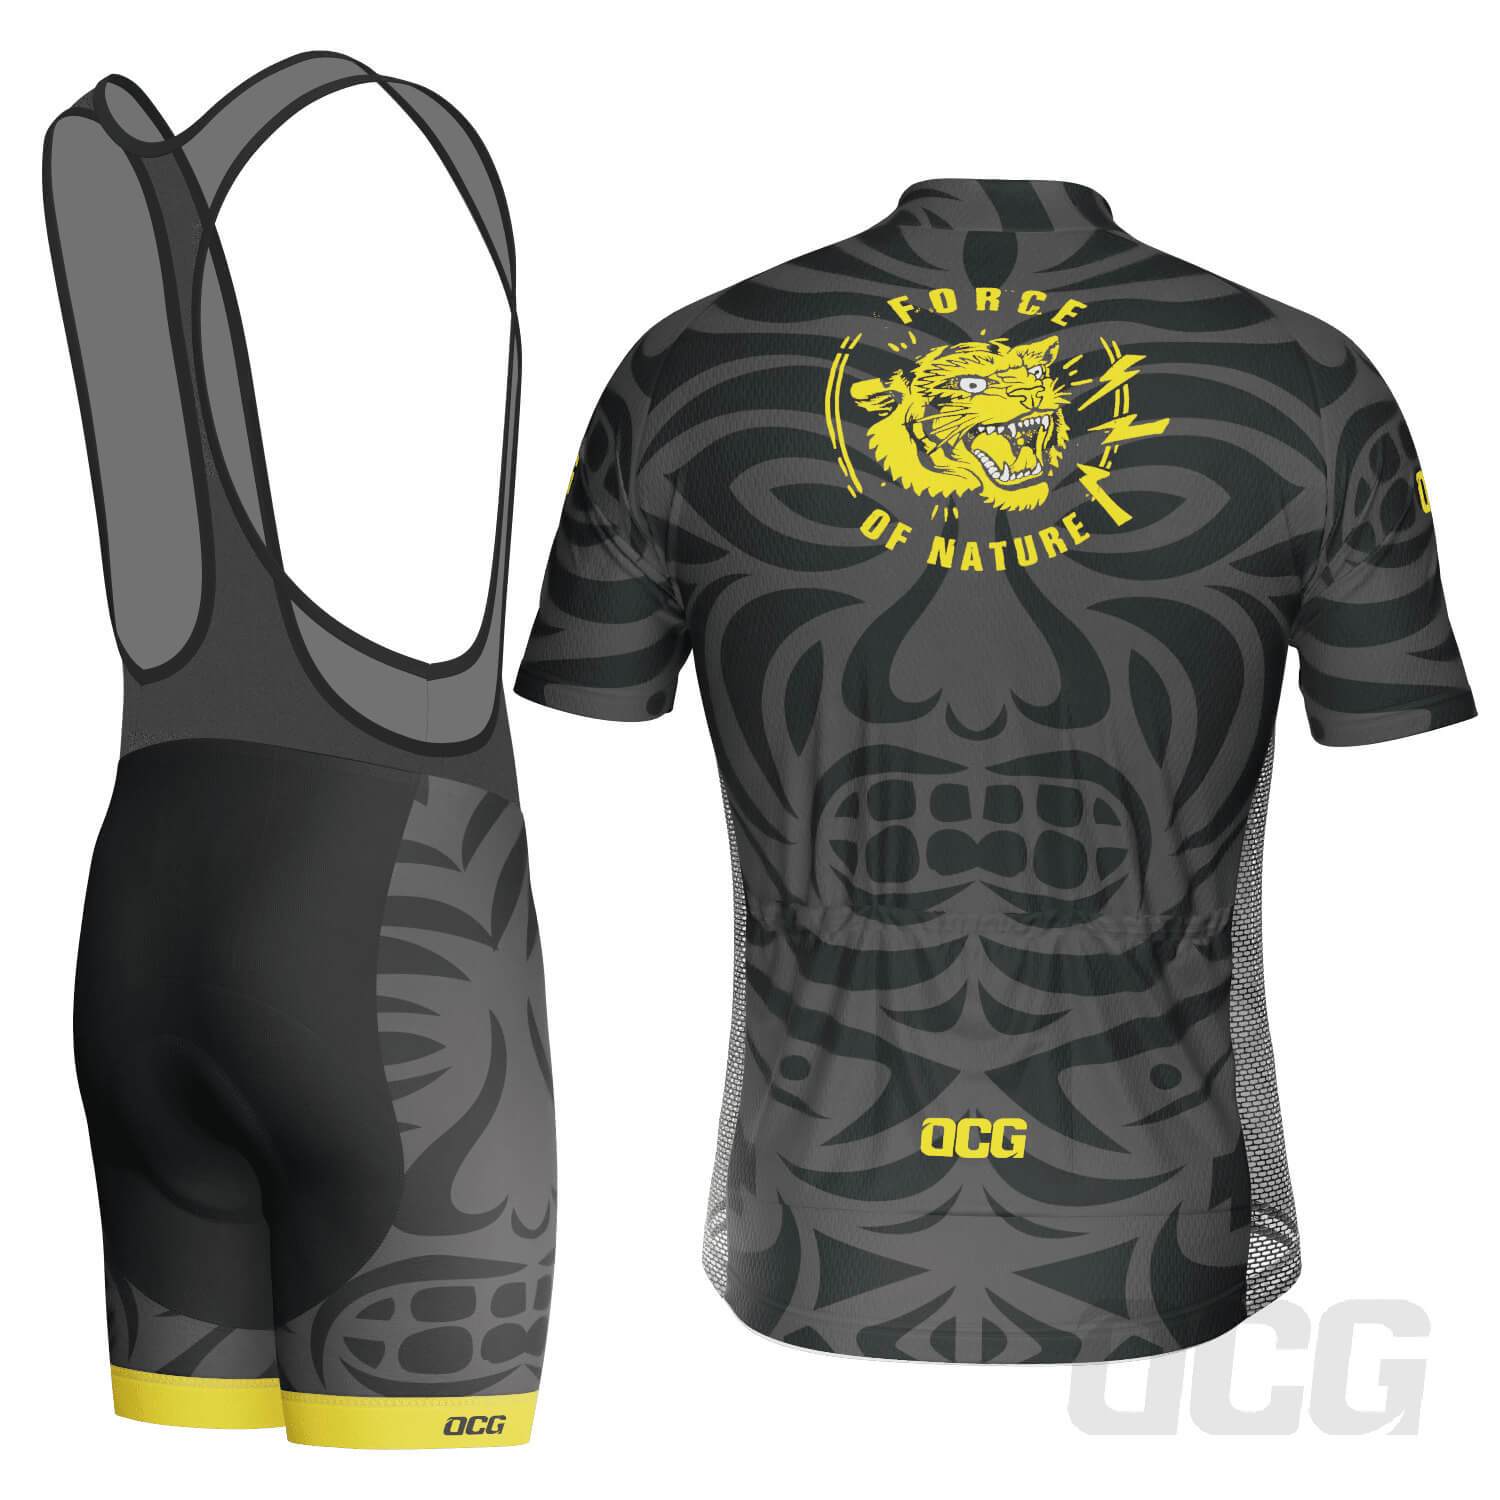 Men's Force of Nature Tribal Short Sleeve Cycling Kit